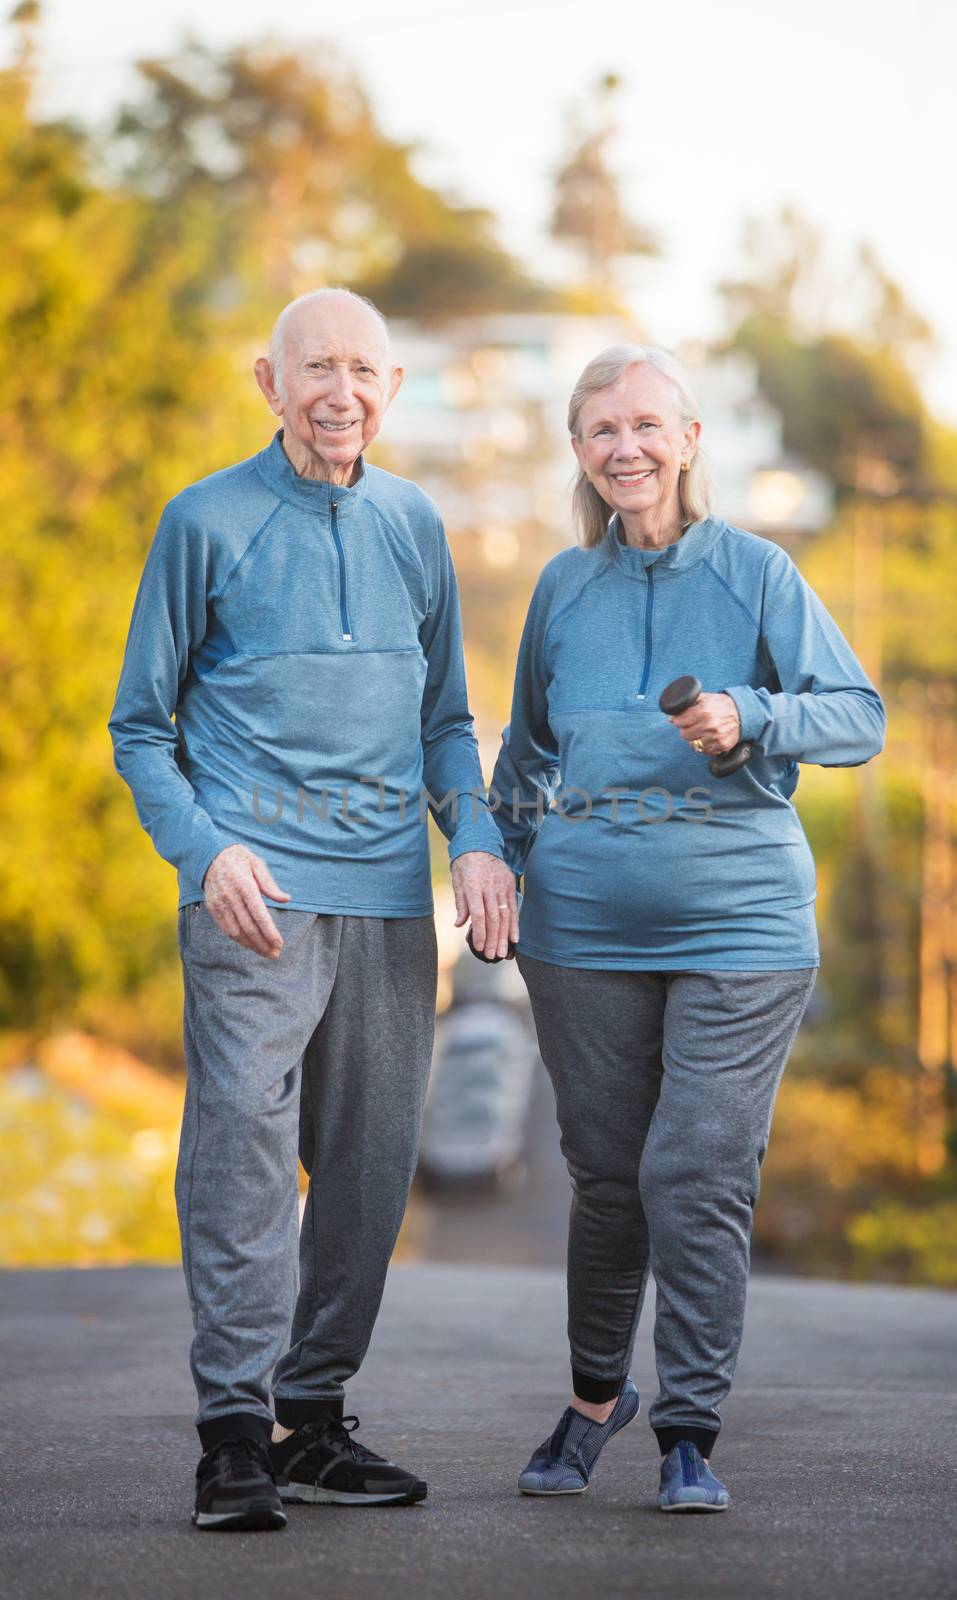 Happy male and female mature couple walking along street with steep hill